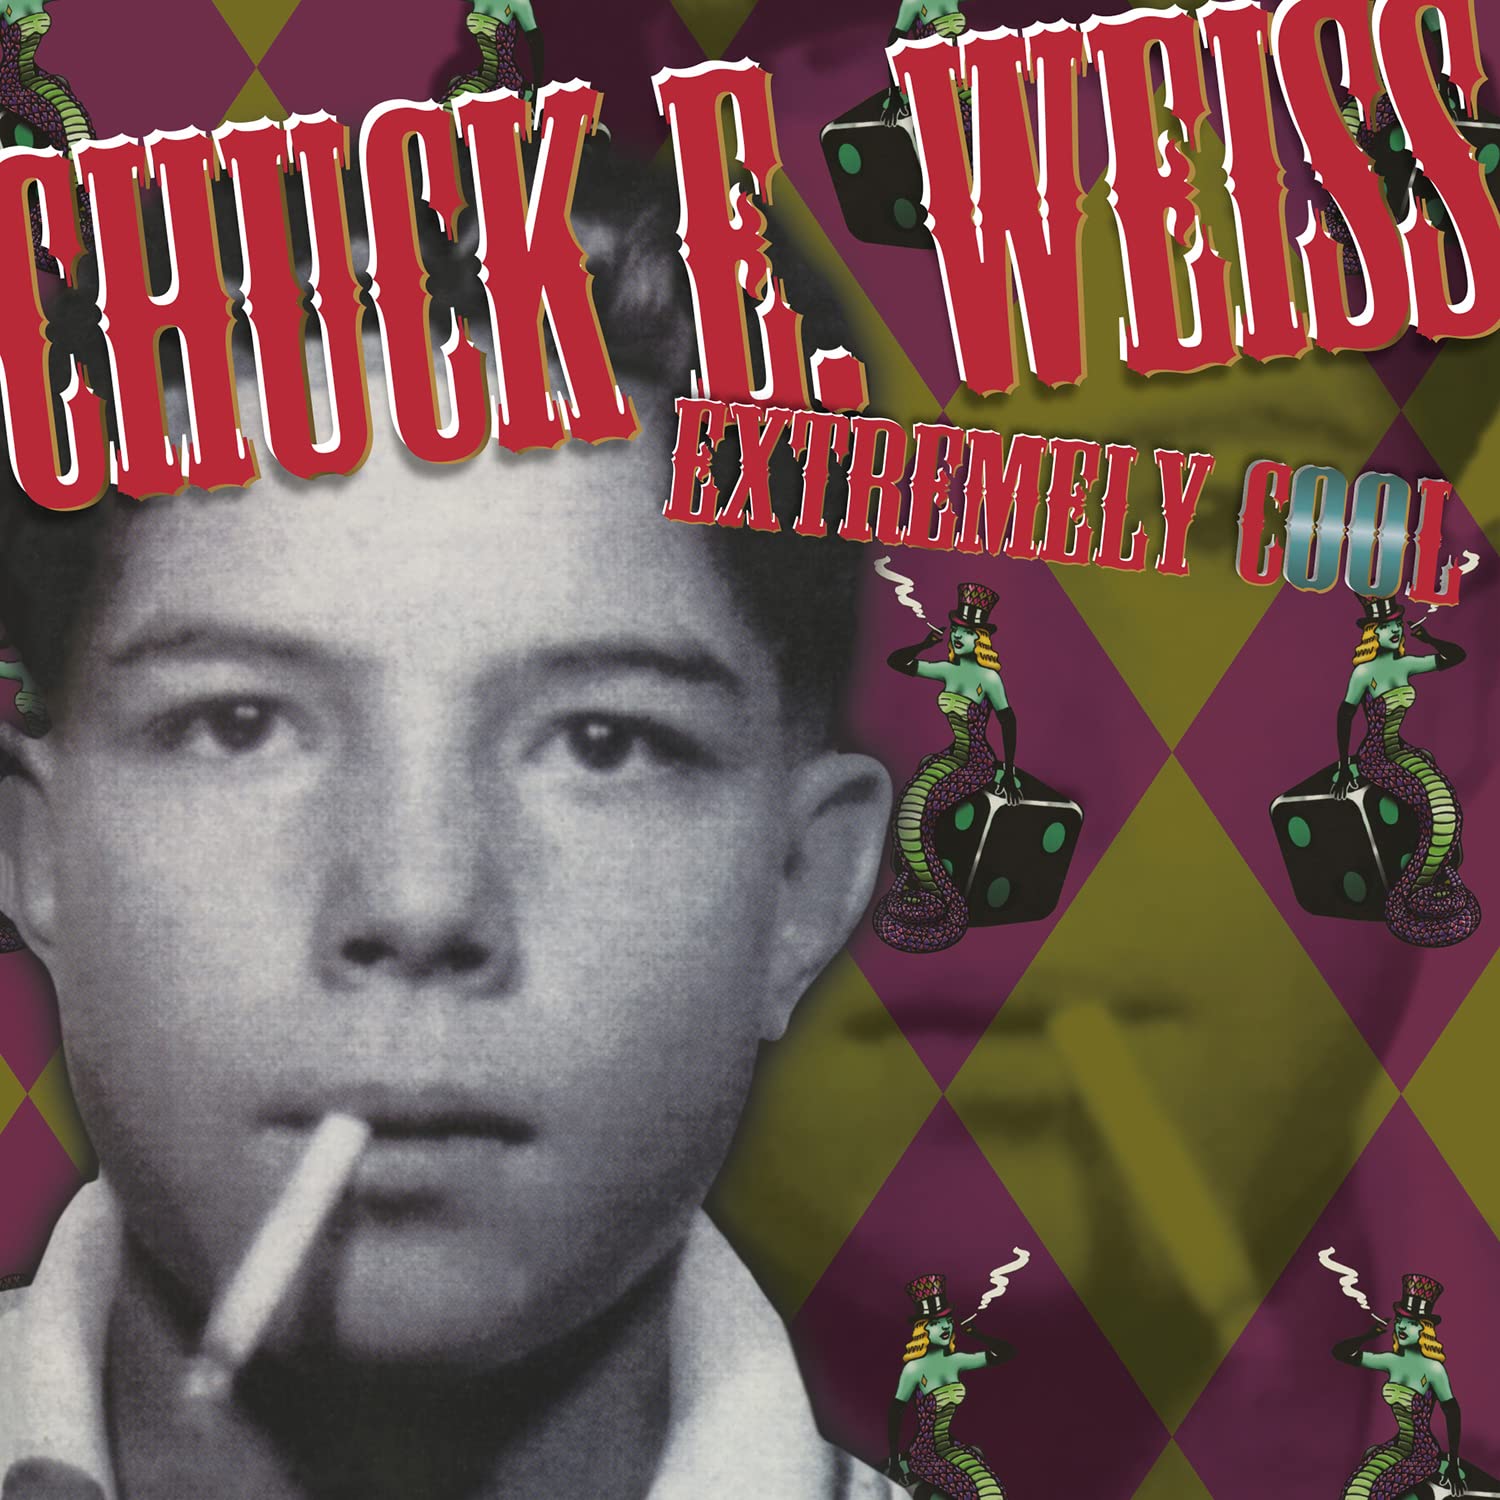 Extremely Cool (Vinyl) - Chuck E. Weiss